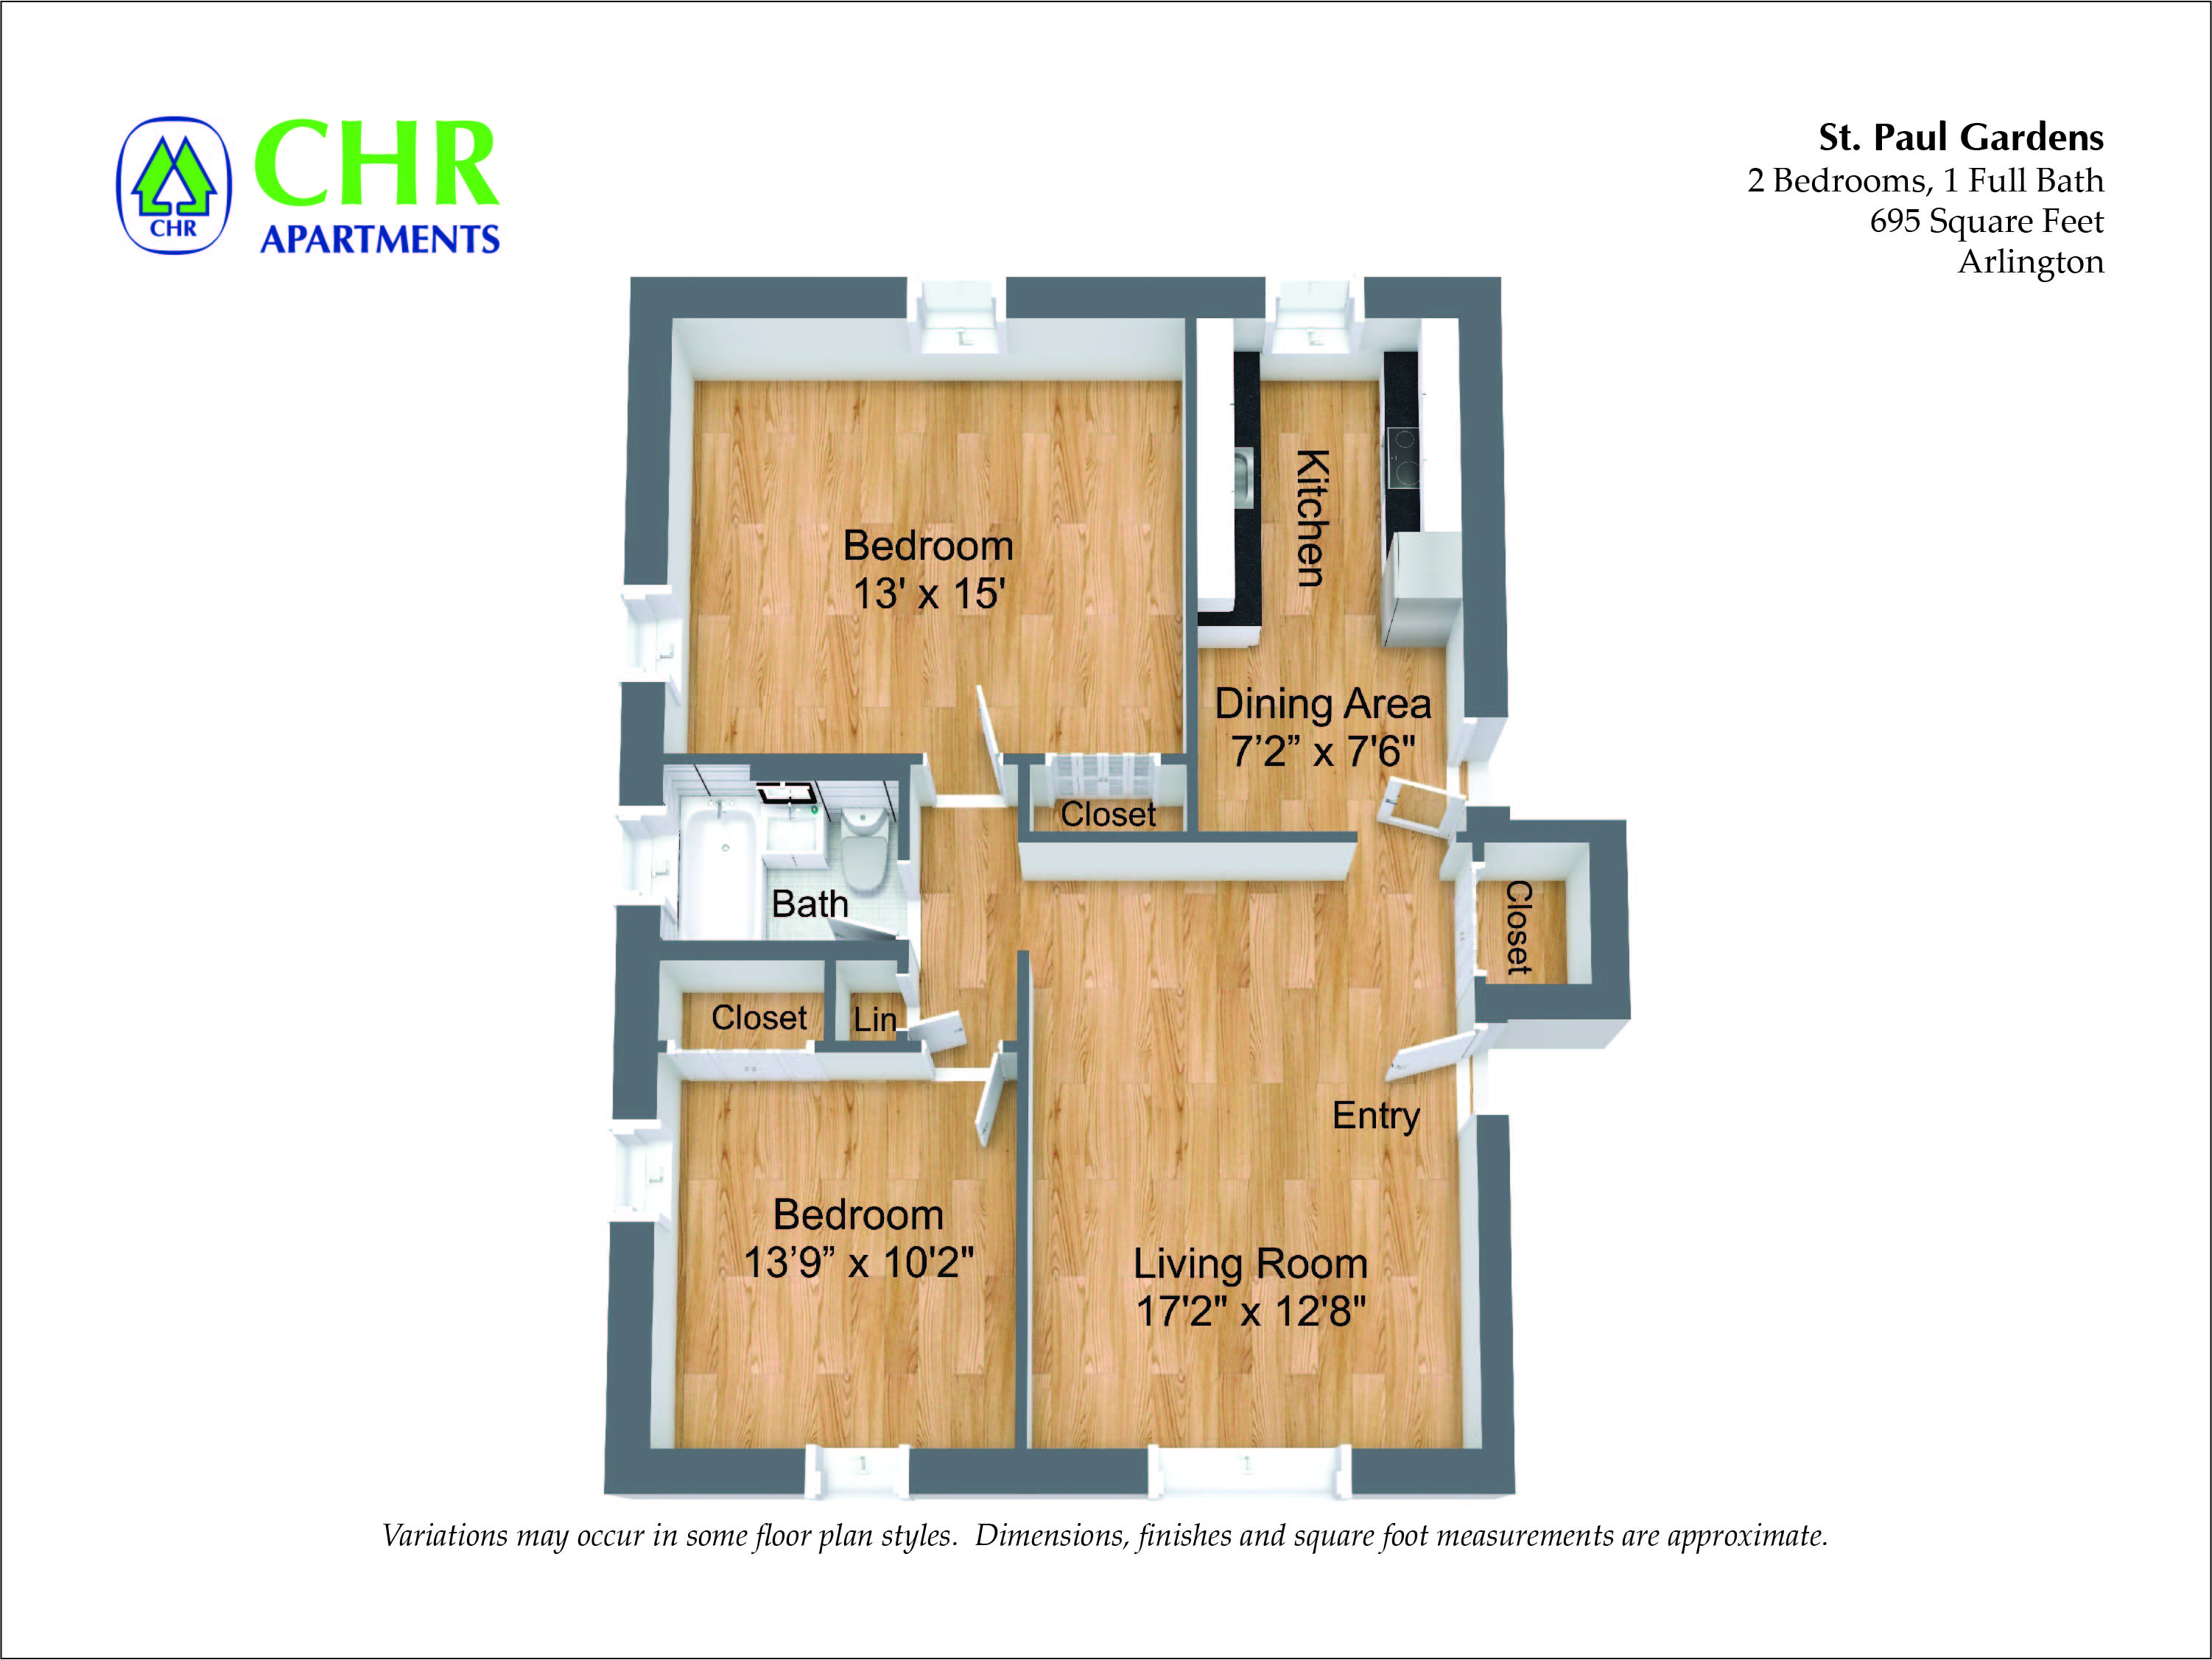 Click to view St. Paul Gardens - 2 Bed/1 Bath floor plan gallery